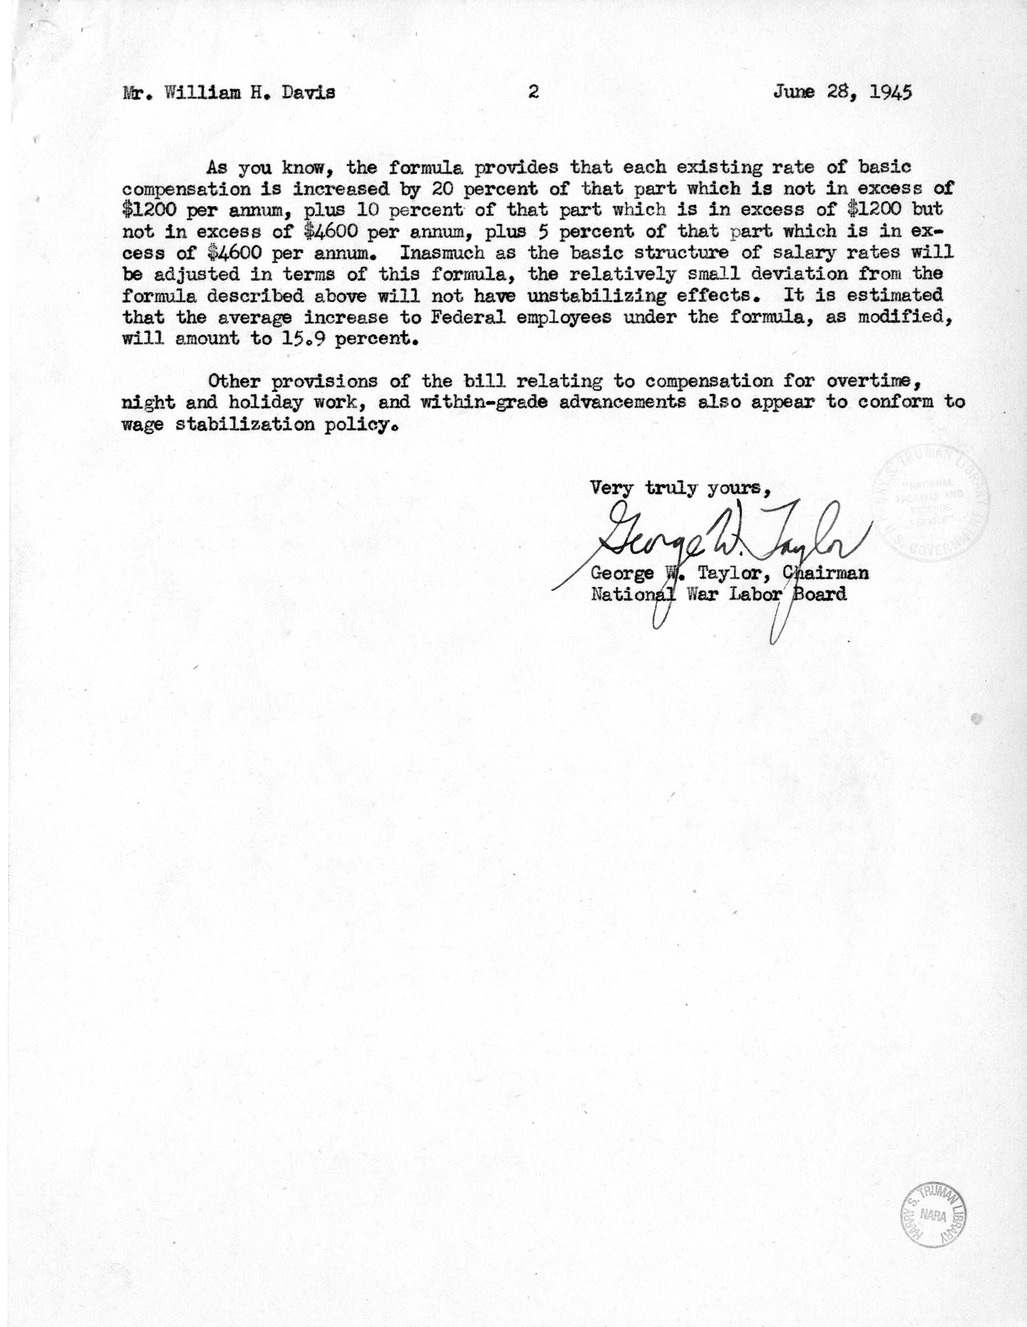 Memorandum from Harold D. Smith to M. C. Latta, S. 807, To Improve Salary and Wage Administration in the Federal Service, and Other Purposes, with Attachments